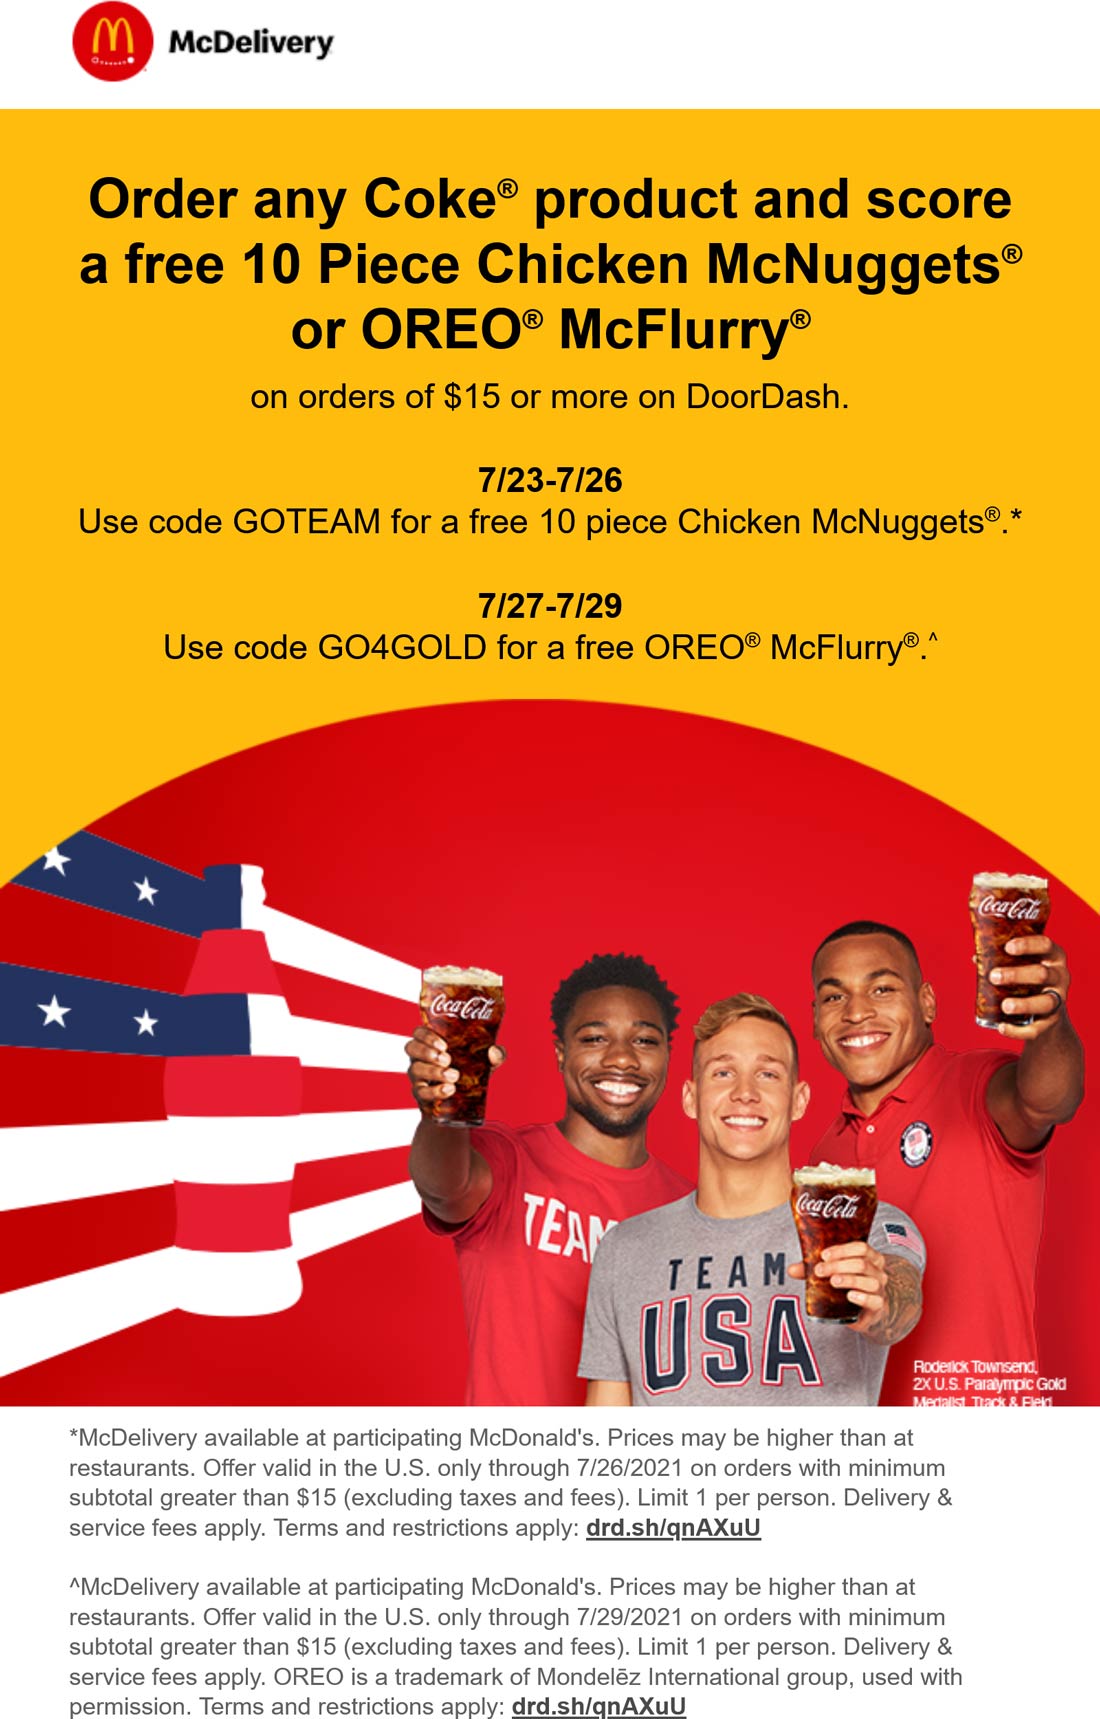 McDonalds restaurants Coupon  Free 10pc chicken nuggets or McFlurry with $15 delivery at McDonalds via promo code GOTEAM or GO4GOLD #mcdonalds 